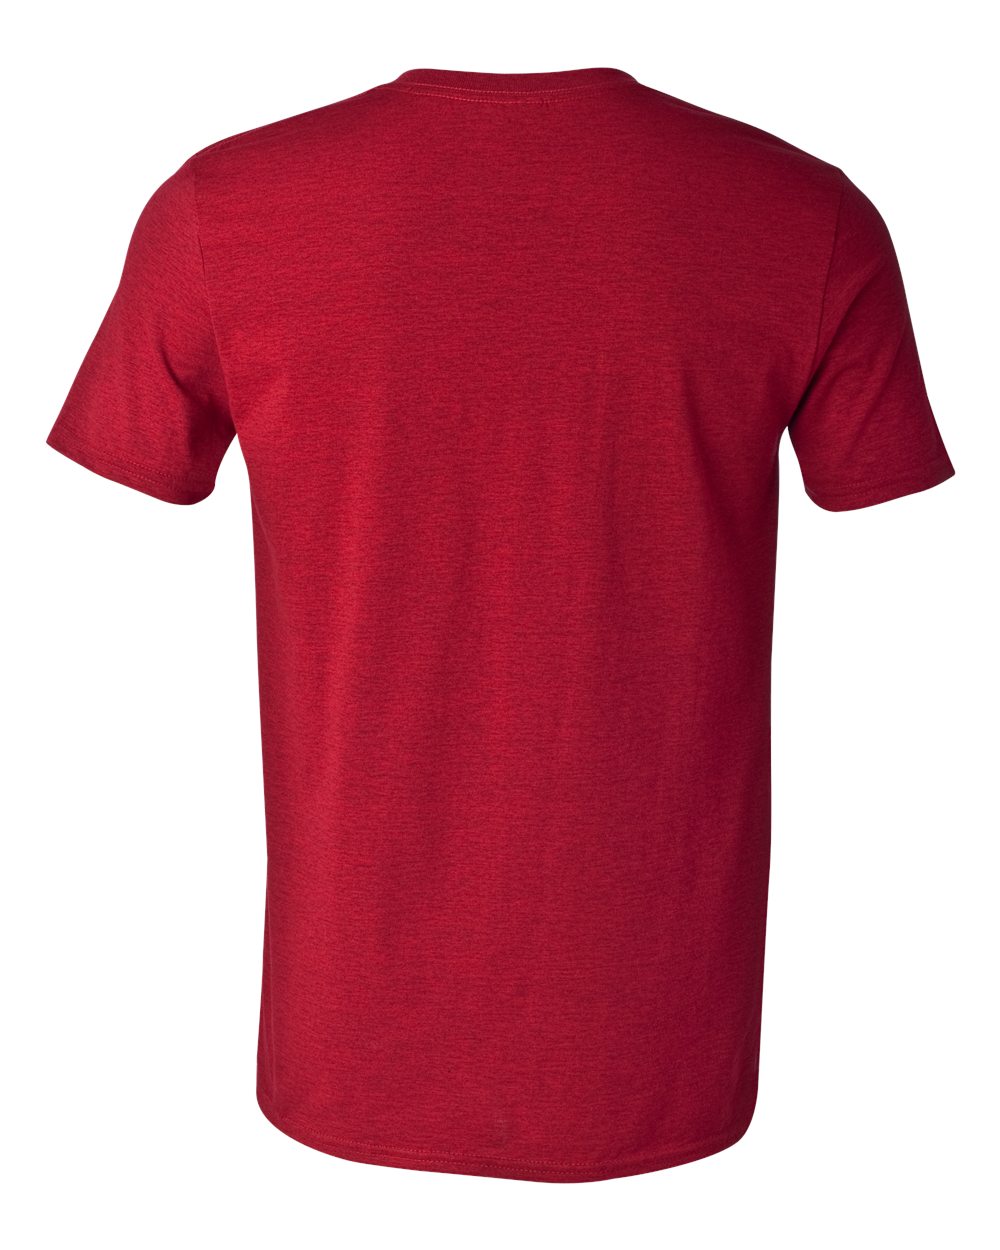 Gildan Softstyle® T-Shirt 64000 #color_Antique Cherry Red